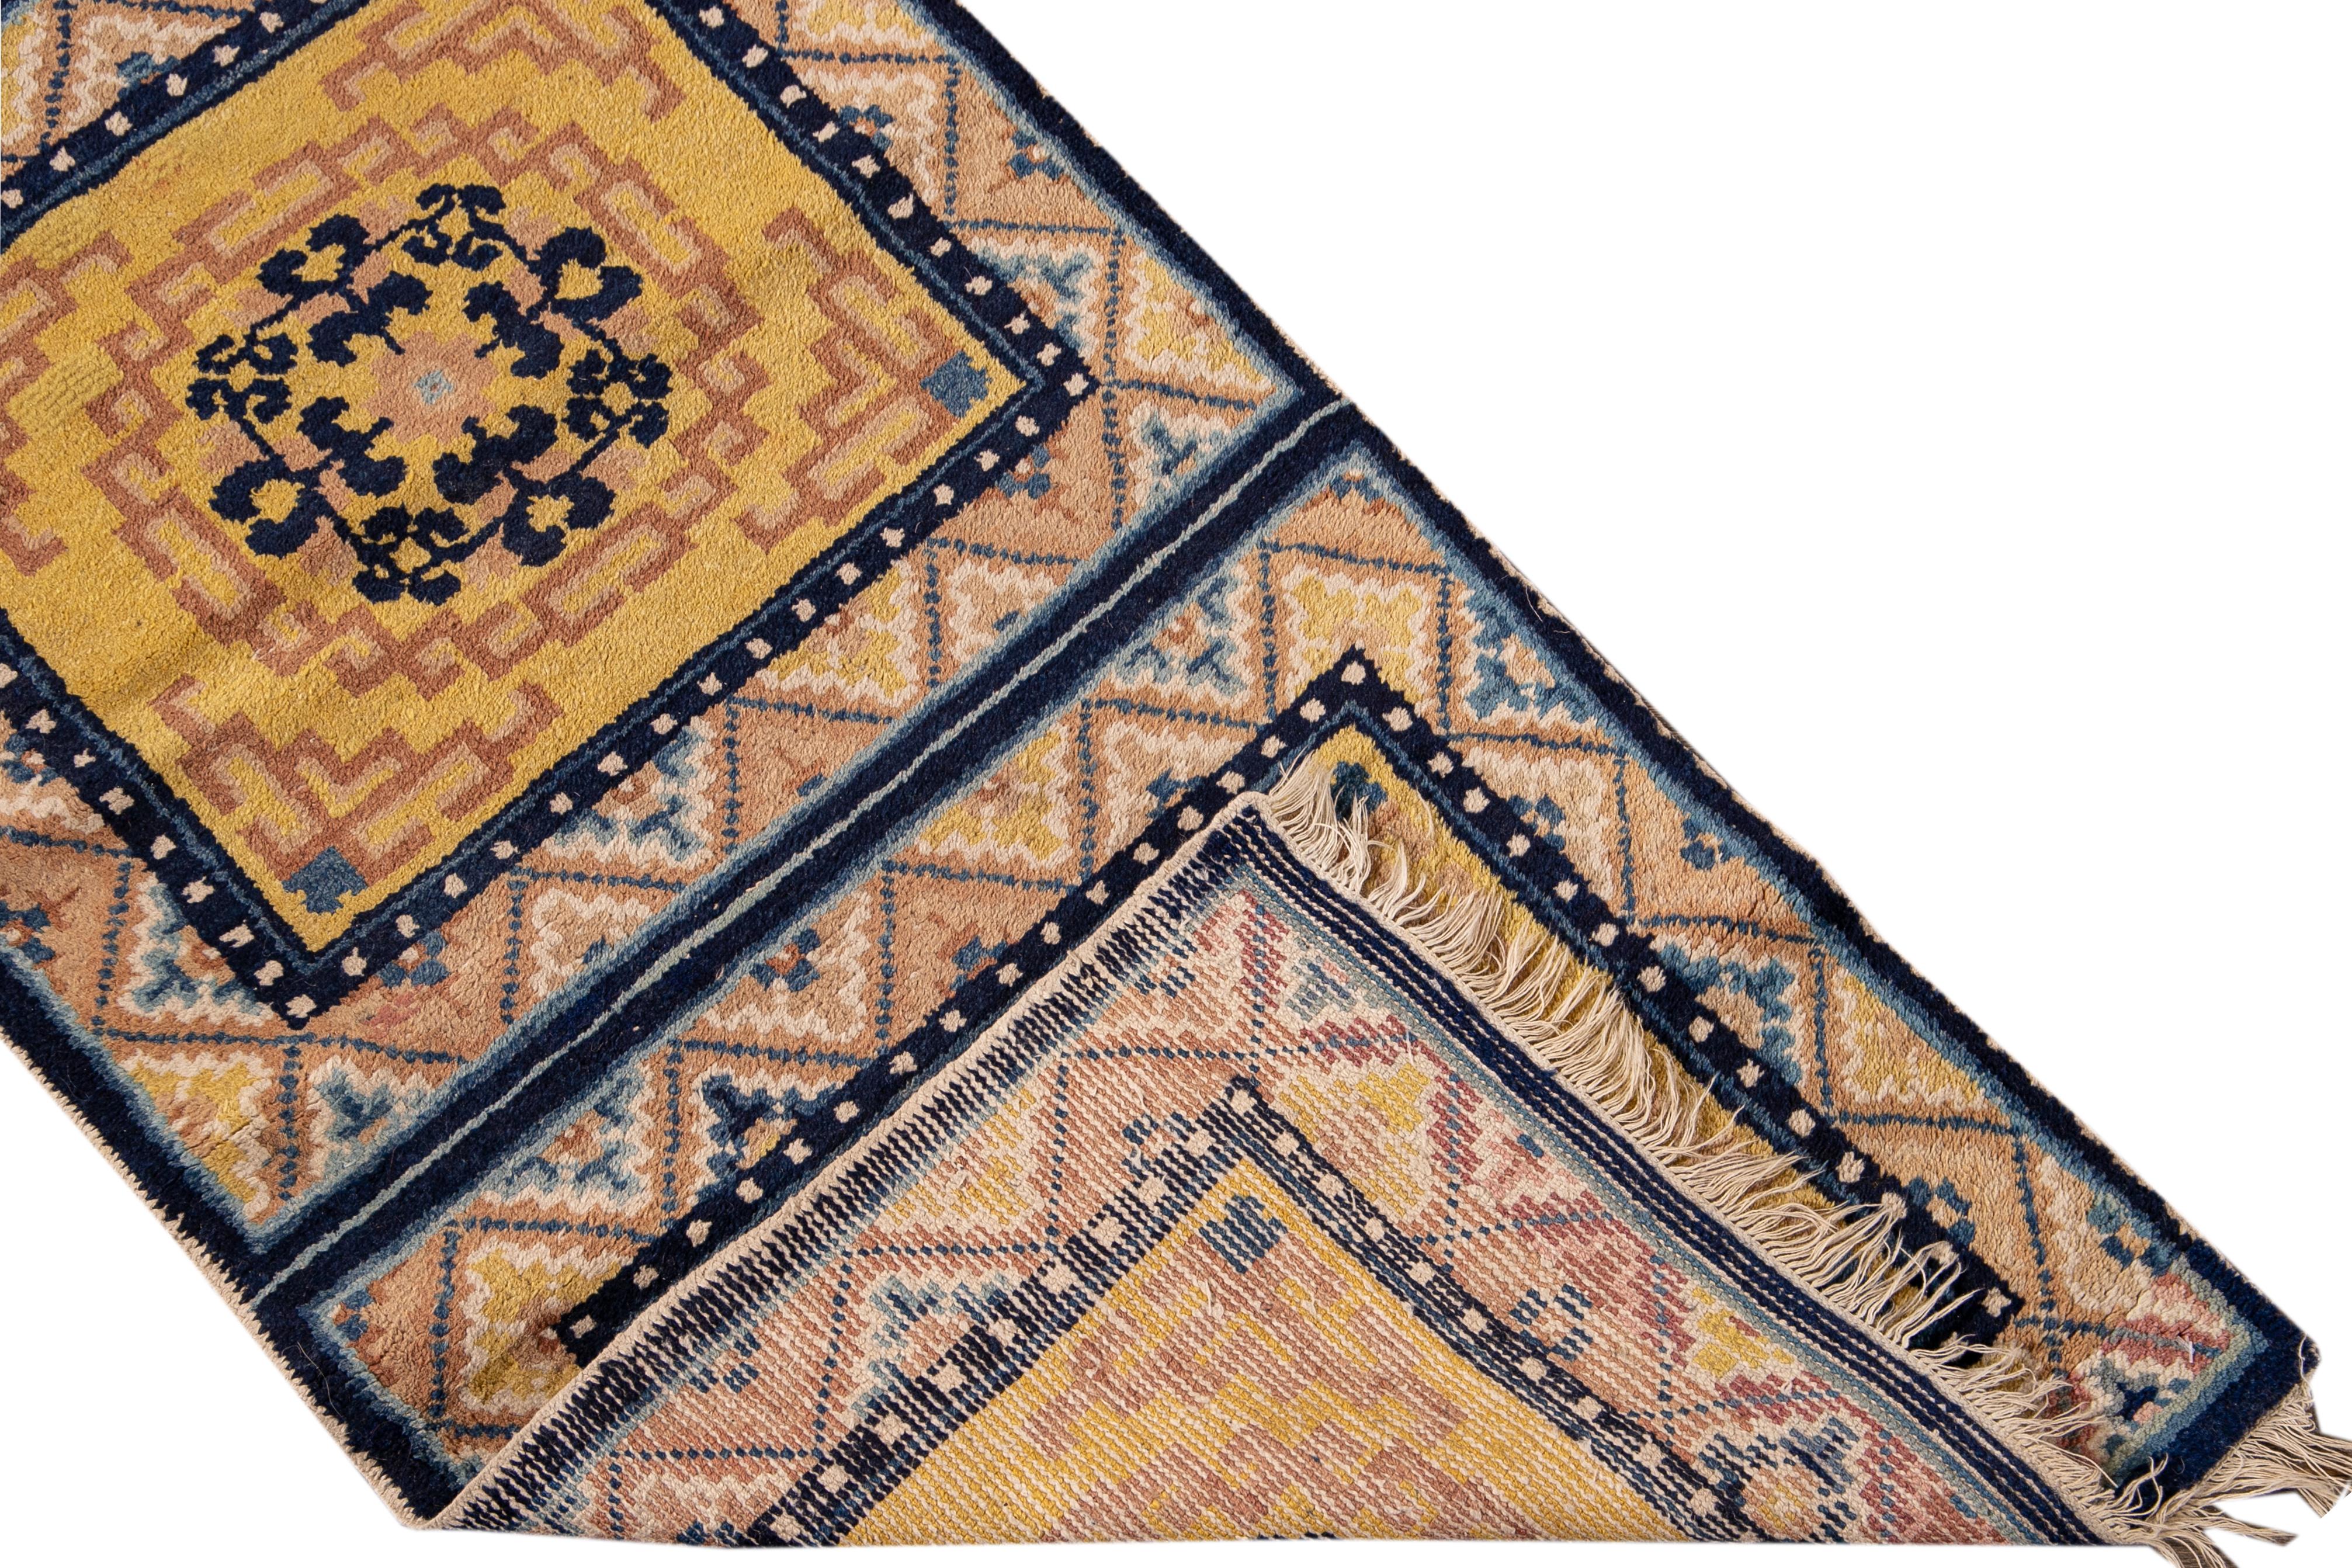 Beautiful antique Ningxia Chinese hand-knotted wool runner with a yellow field. This Chinese runner has a blue frame and accents of brown, yellow, and blue in a gorgeous all-over Chinese medallion floral design. 

This rug measures: 2' x 11'4